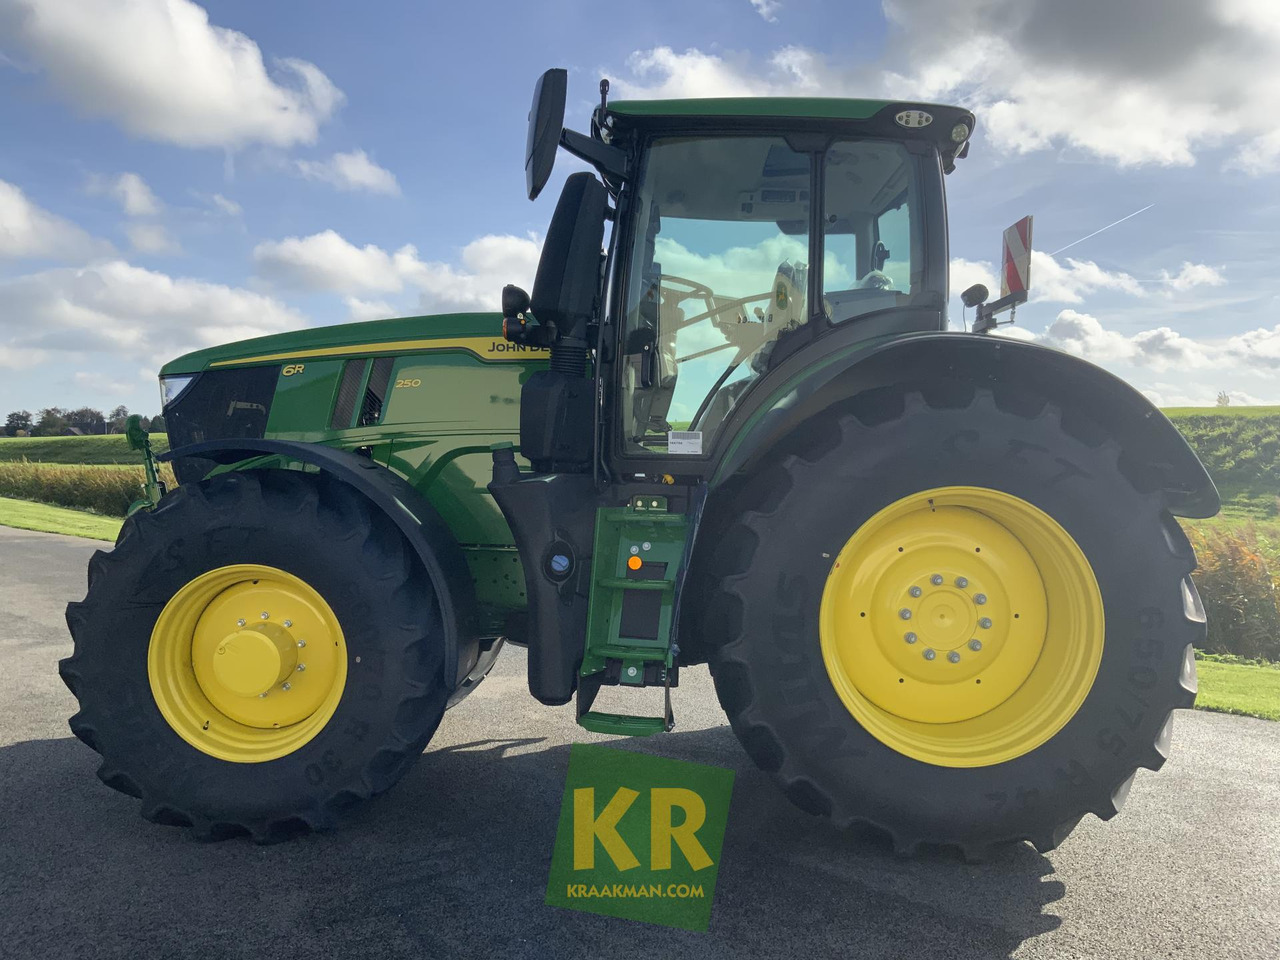 New 6R 250 John Deere Farm tractor for sale at Truck1 USA, ID: 7372797